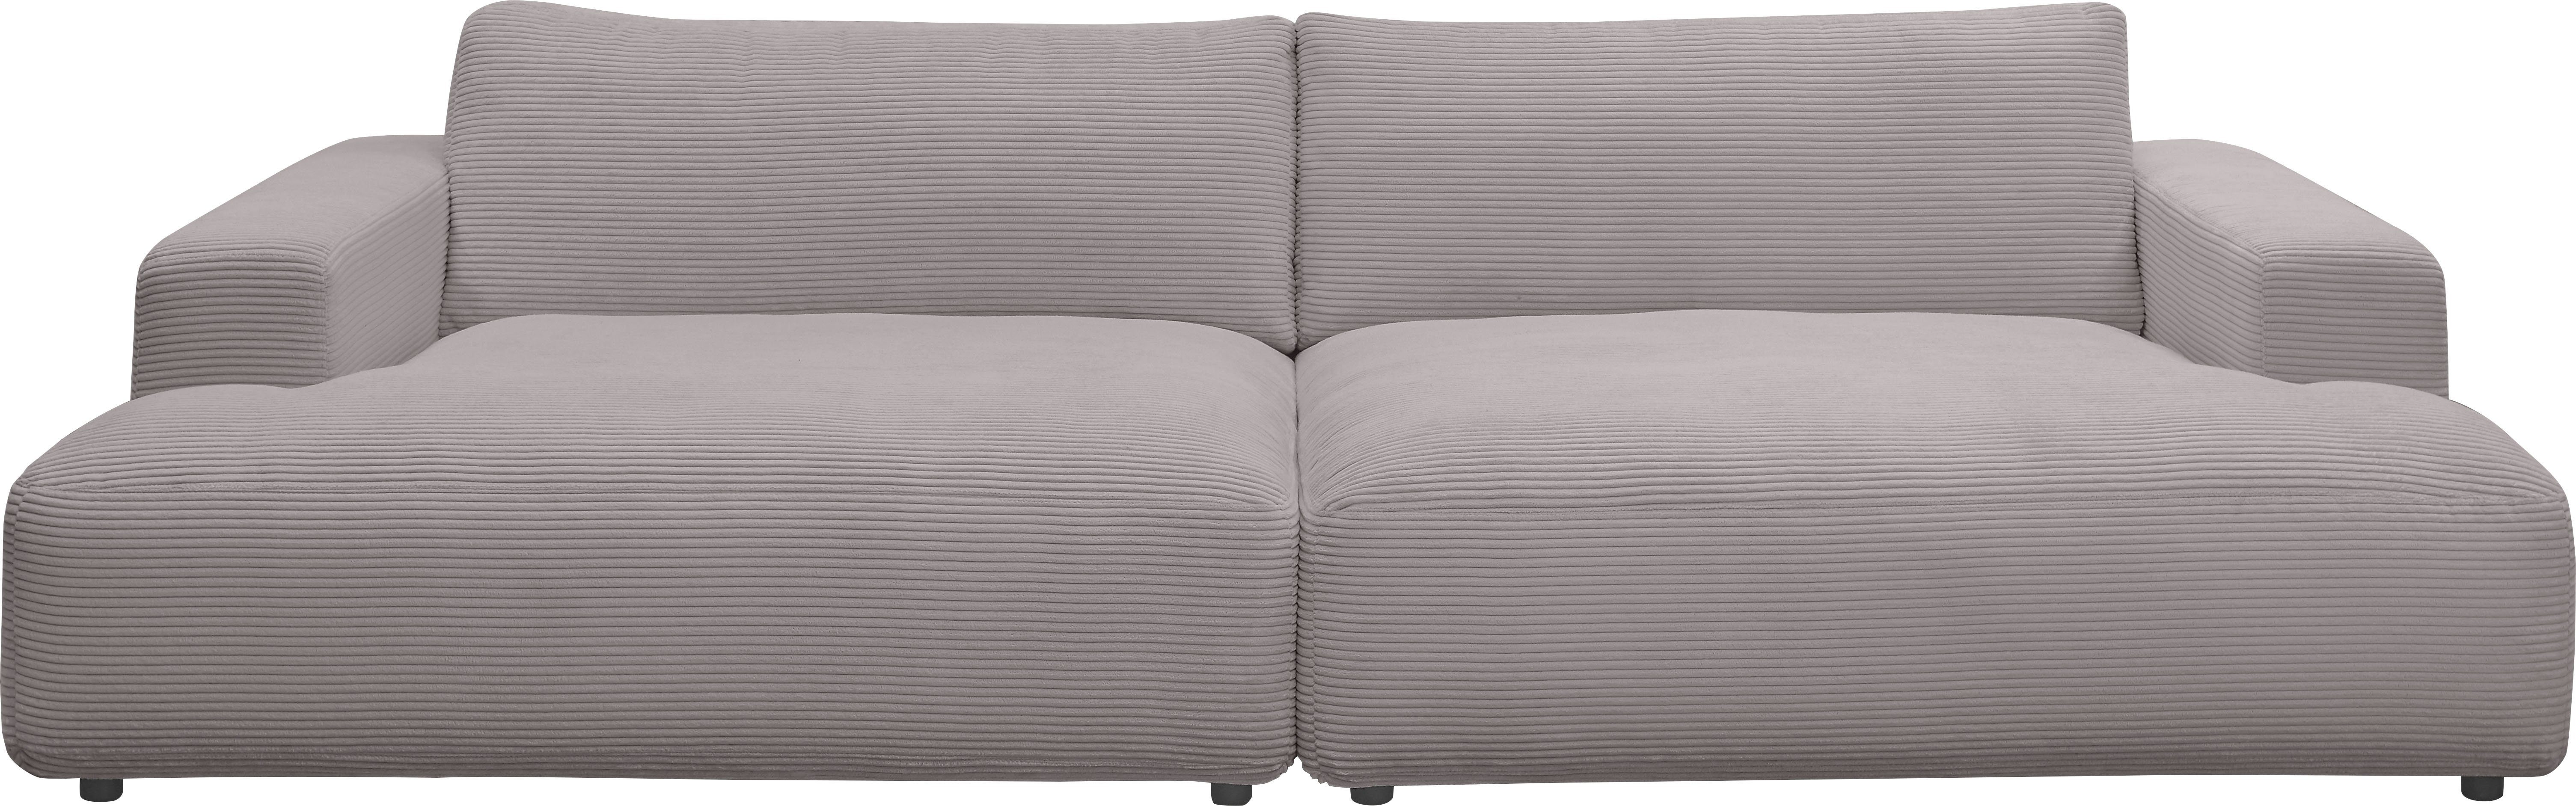 GALLERY M branded by grey 292 cm Breite Musterring Lucia, Cord-Bezug, Loungesofa